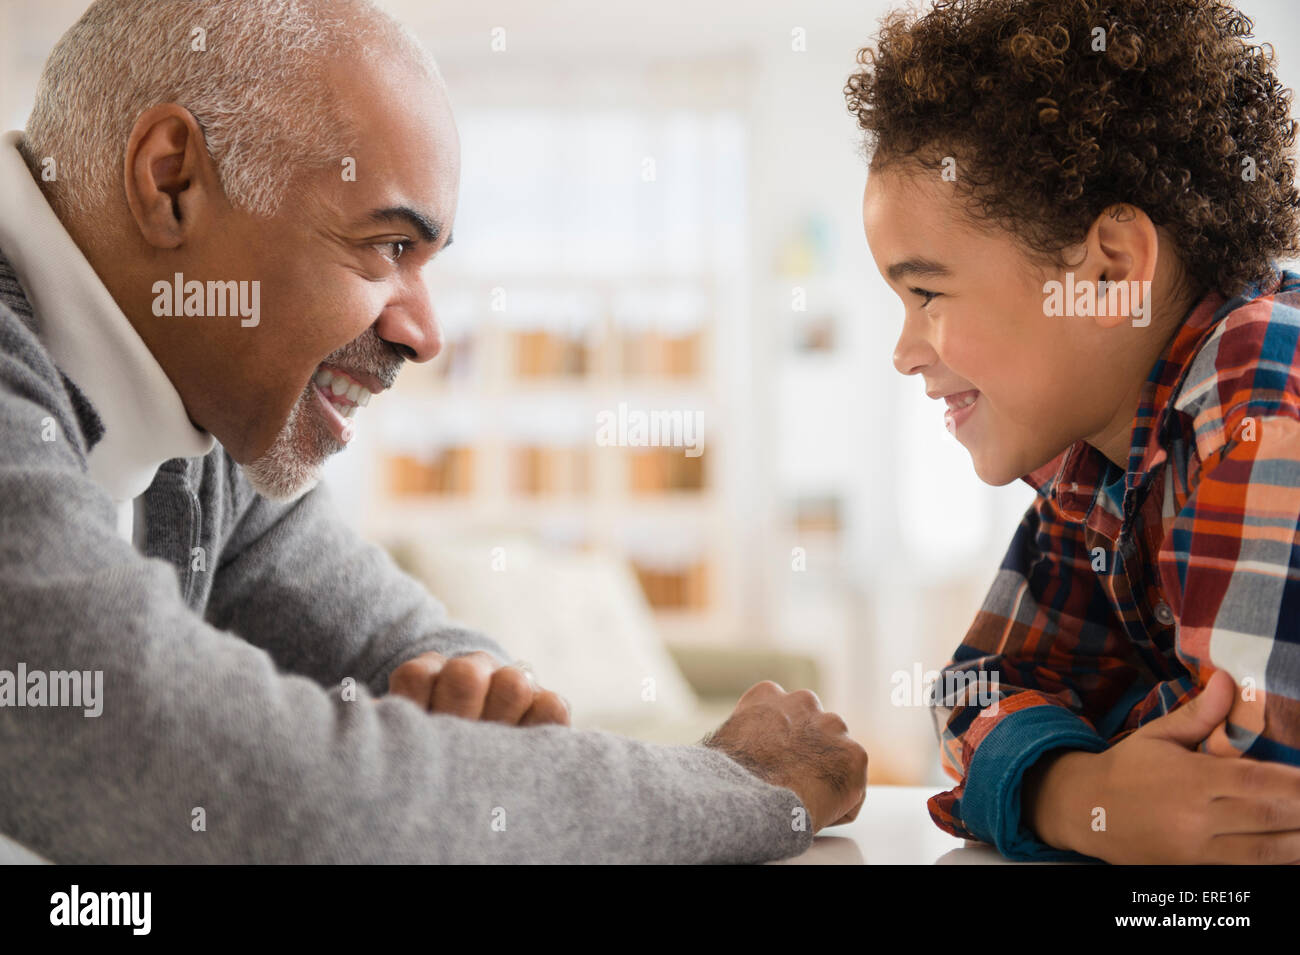 Mixed race grandfather and grandson having staring contest Stock Photo